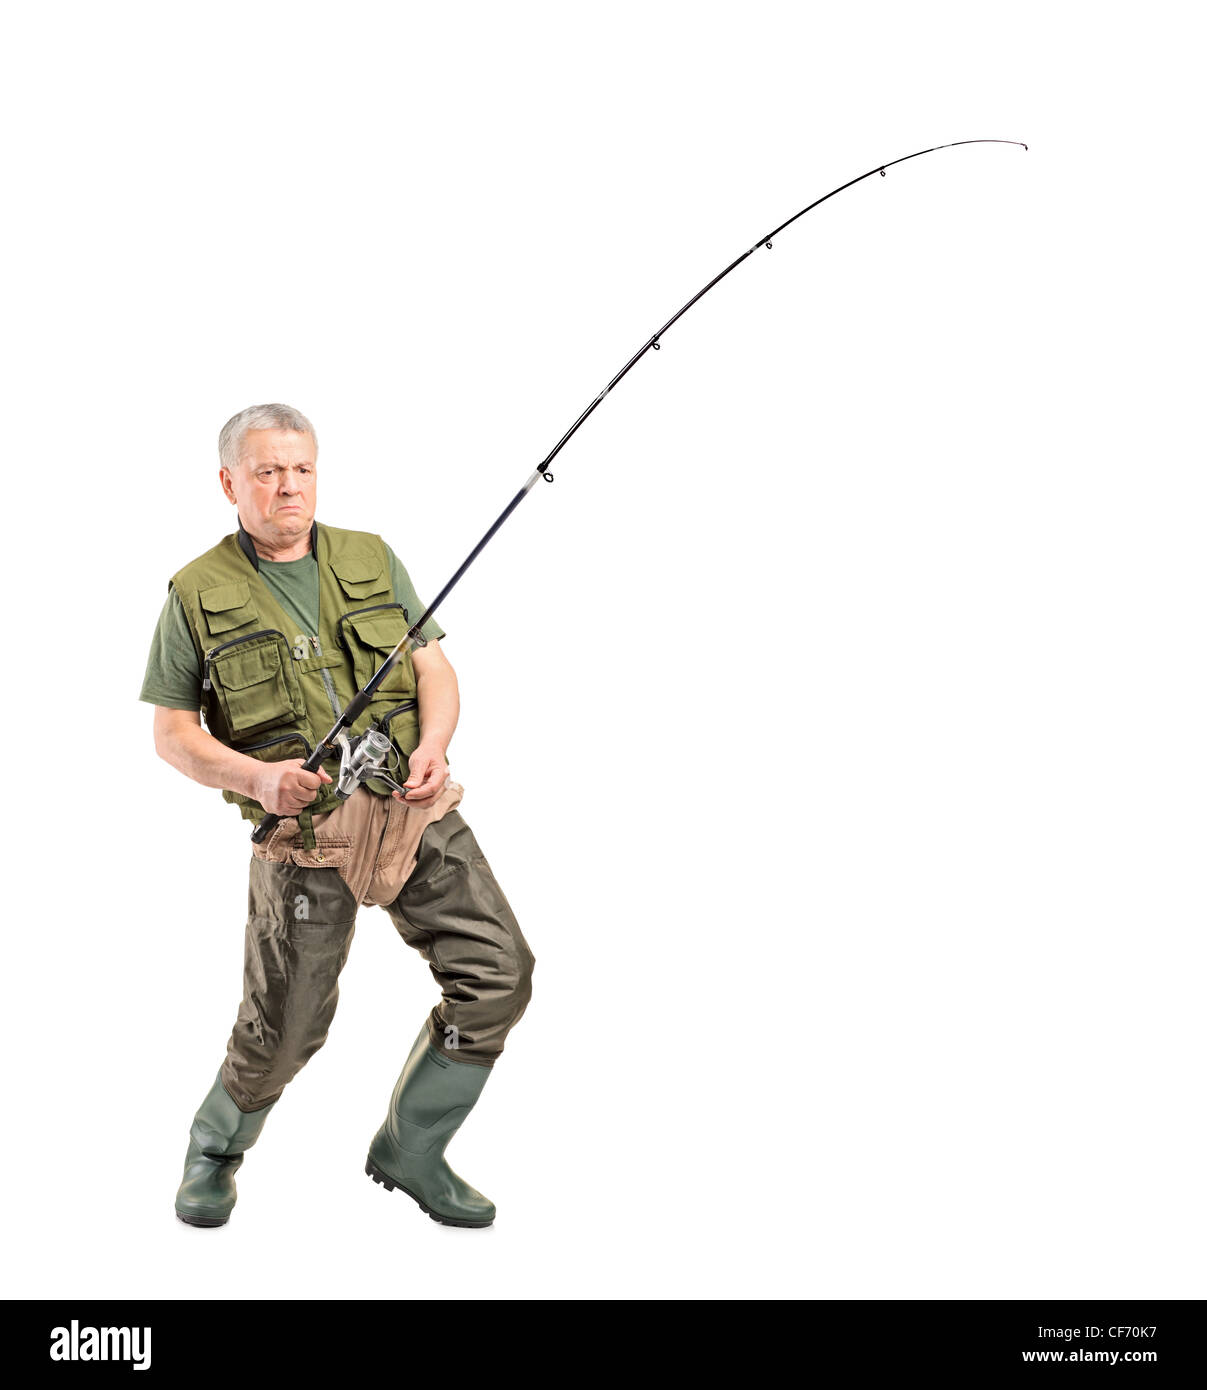 Fishing pose Cut Out Stock Images & Pictures - Alamy